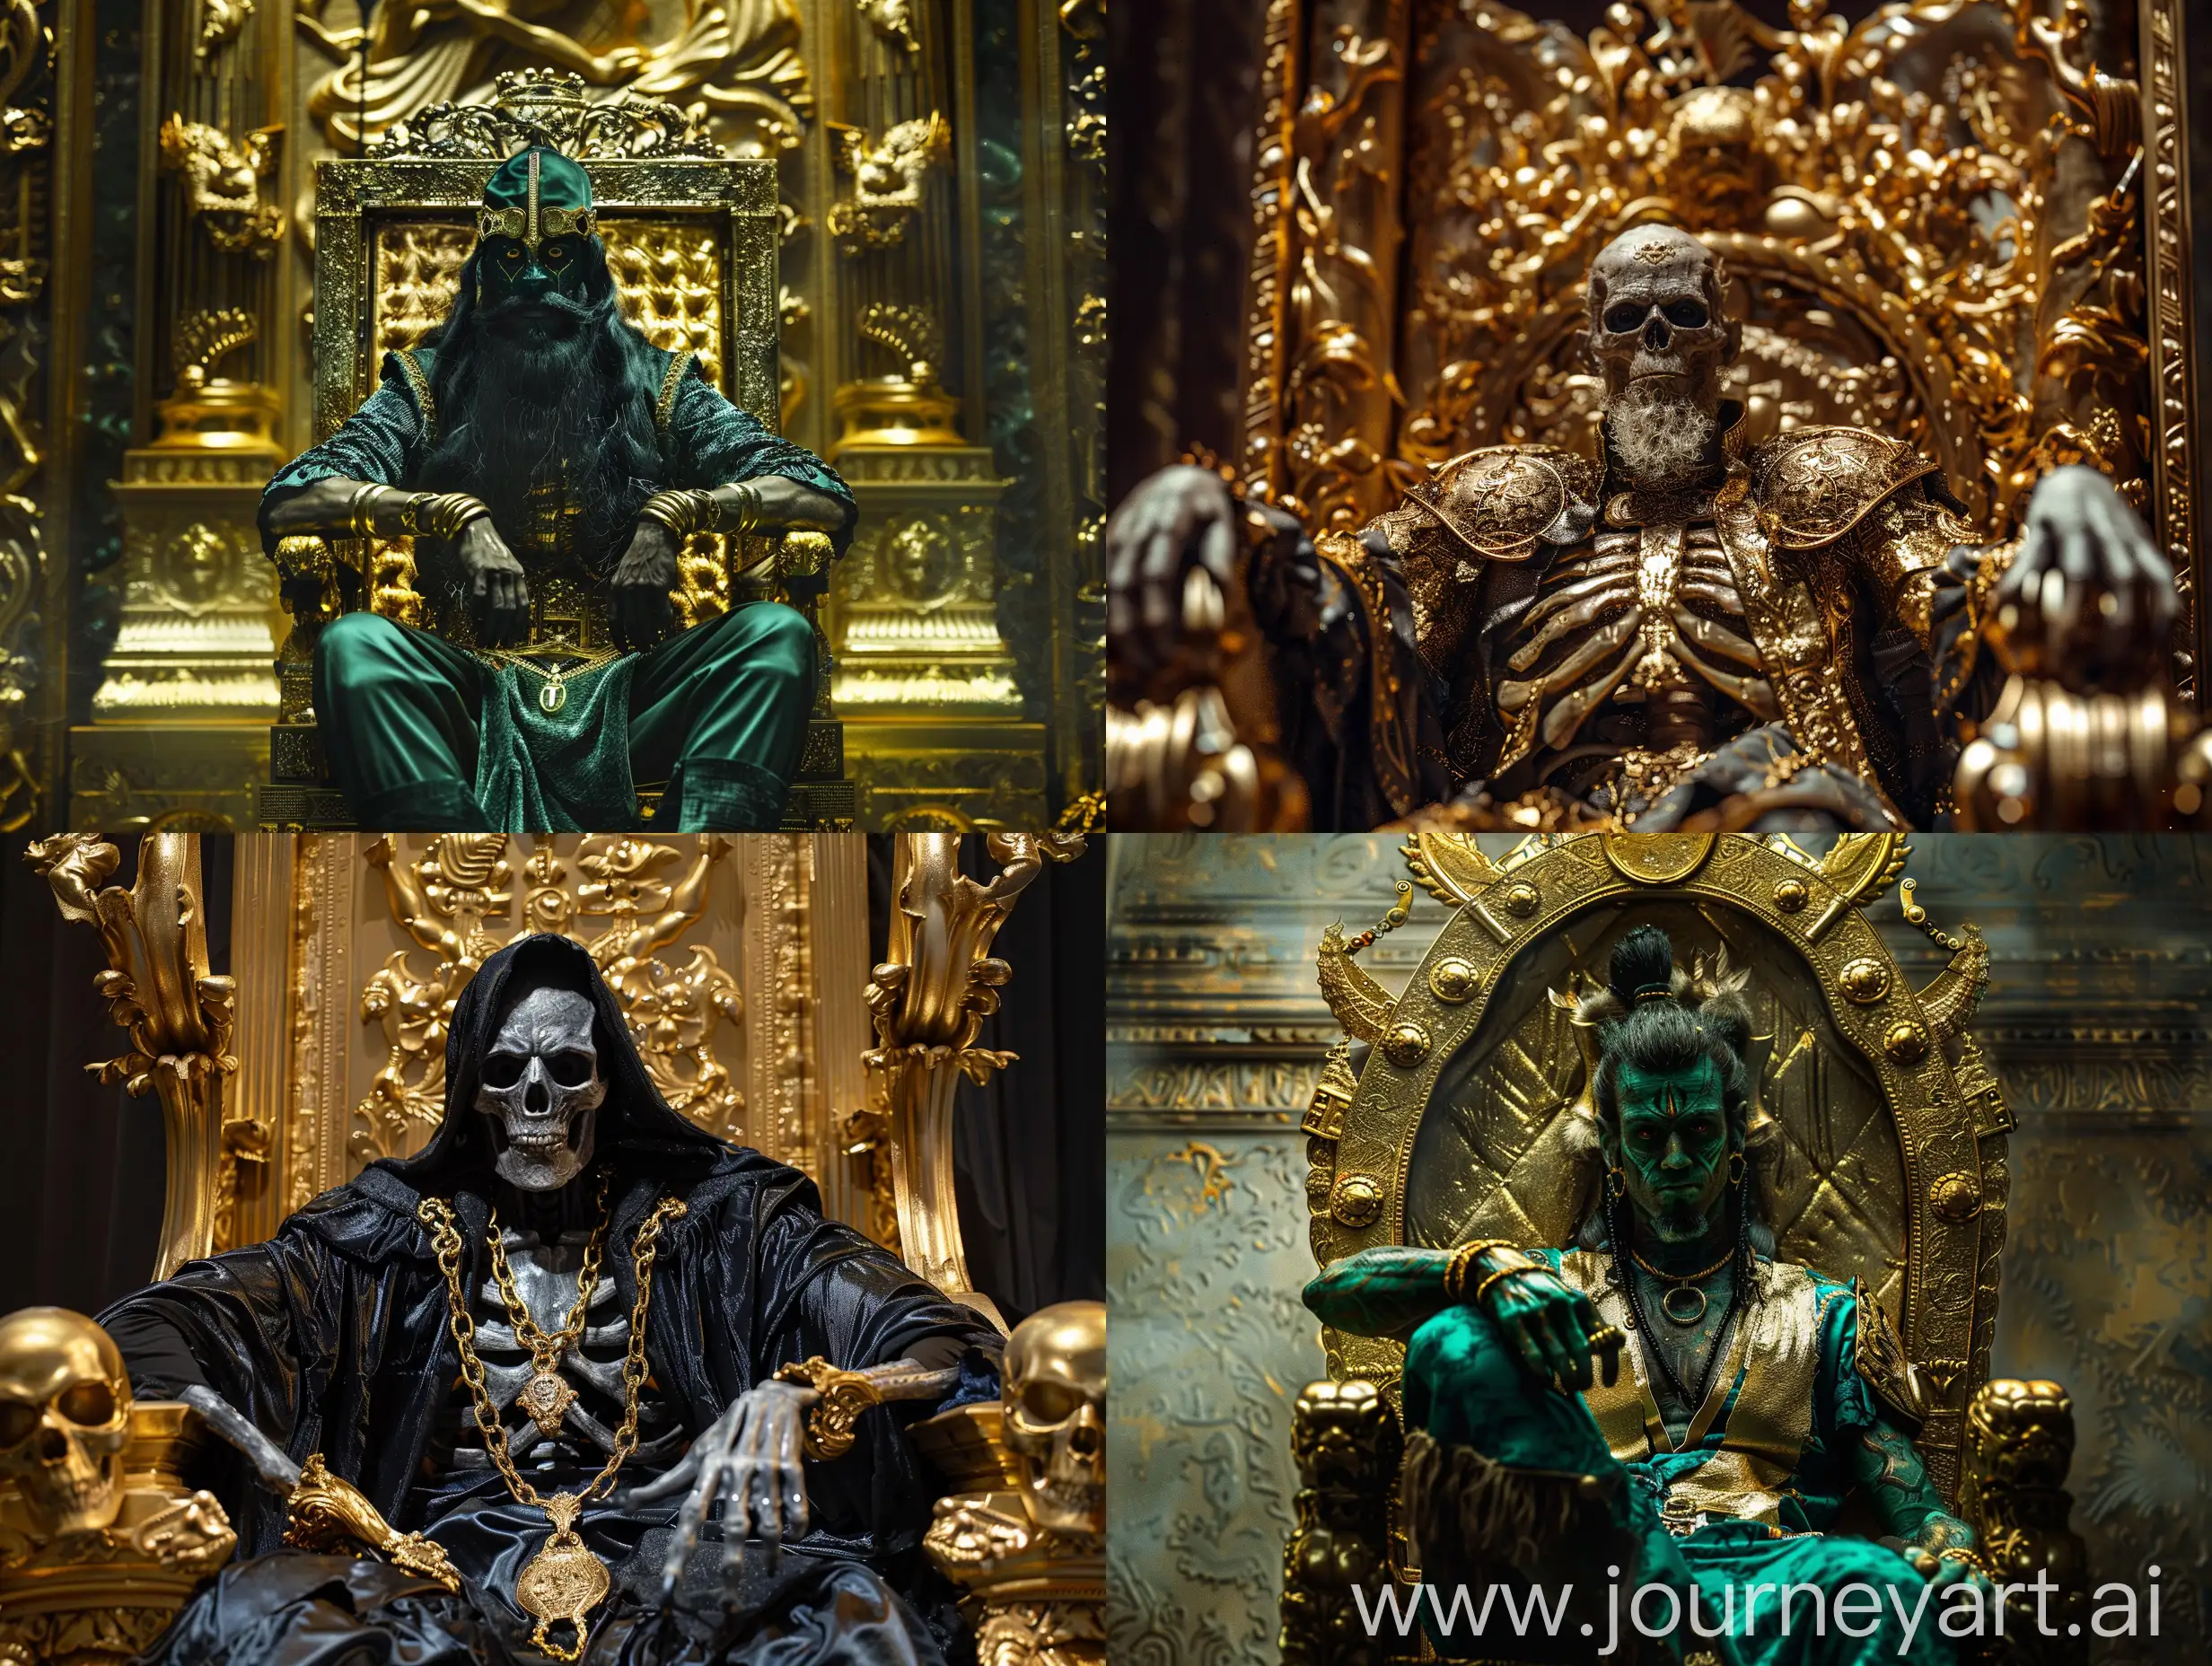 Kashey-the-Deathless-Seated-on-Elaborate-Gilded-Throne-8K-Detailed-Photo